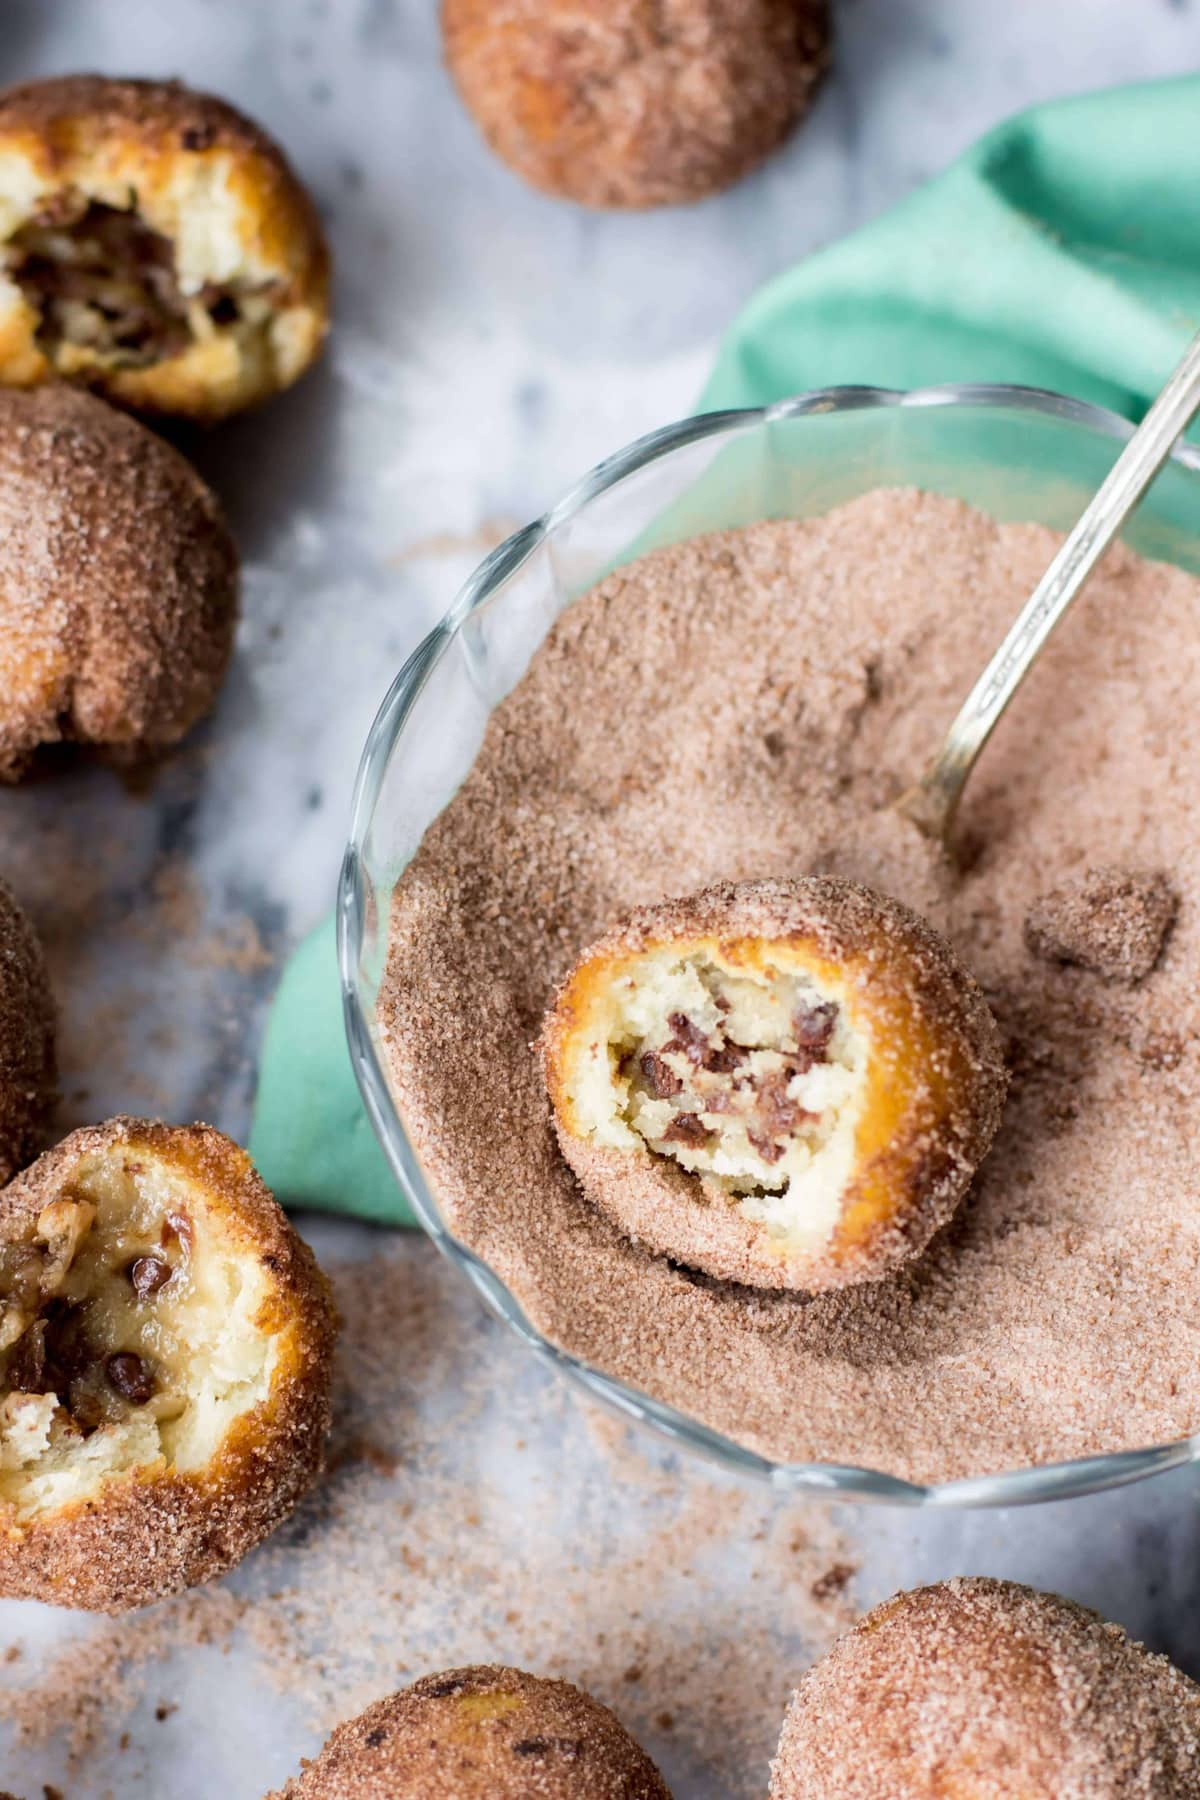 Cookie Dough Stuffed (NO YEAST) Donut Holes rolled in sea-salted chocolate sugar -- OMG!